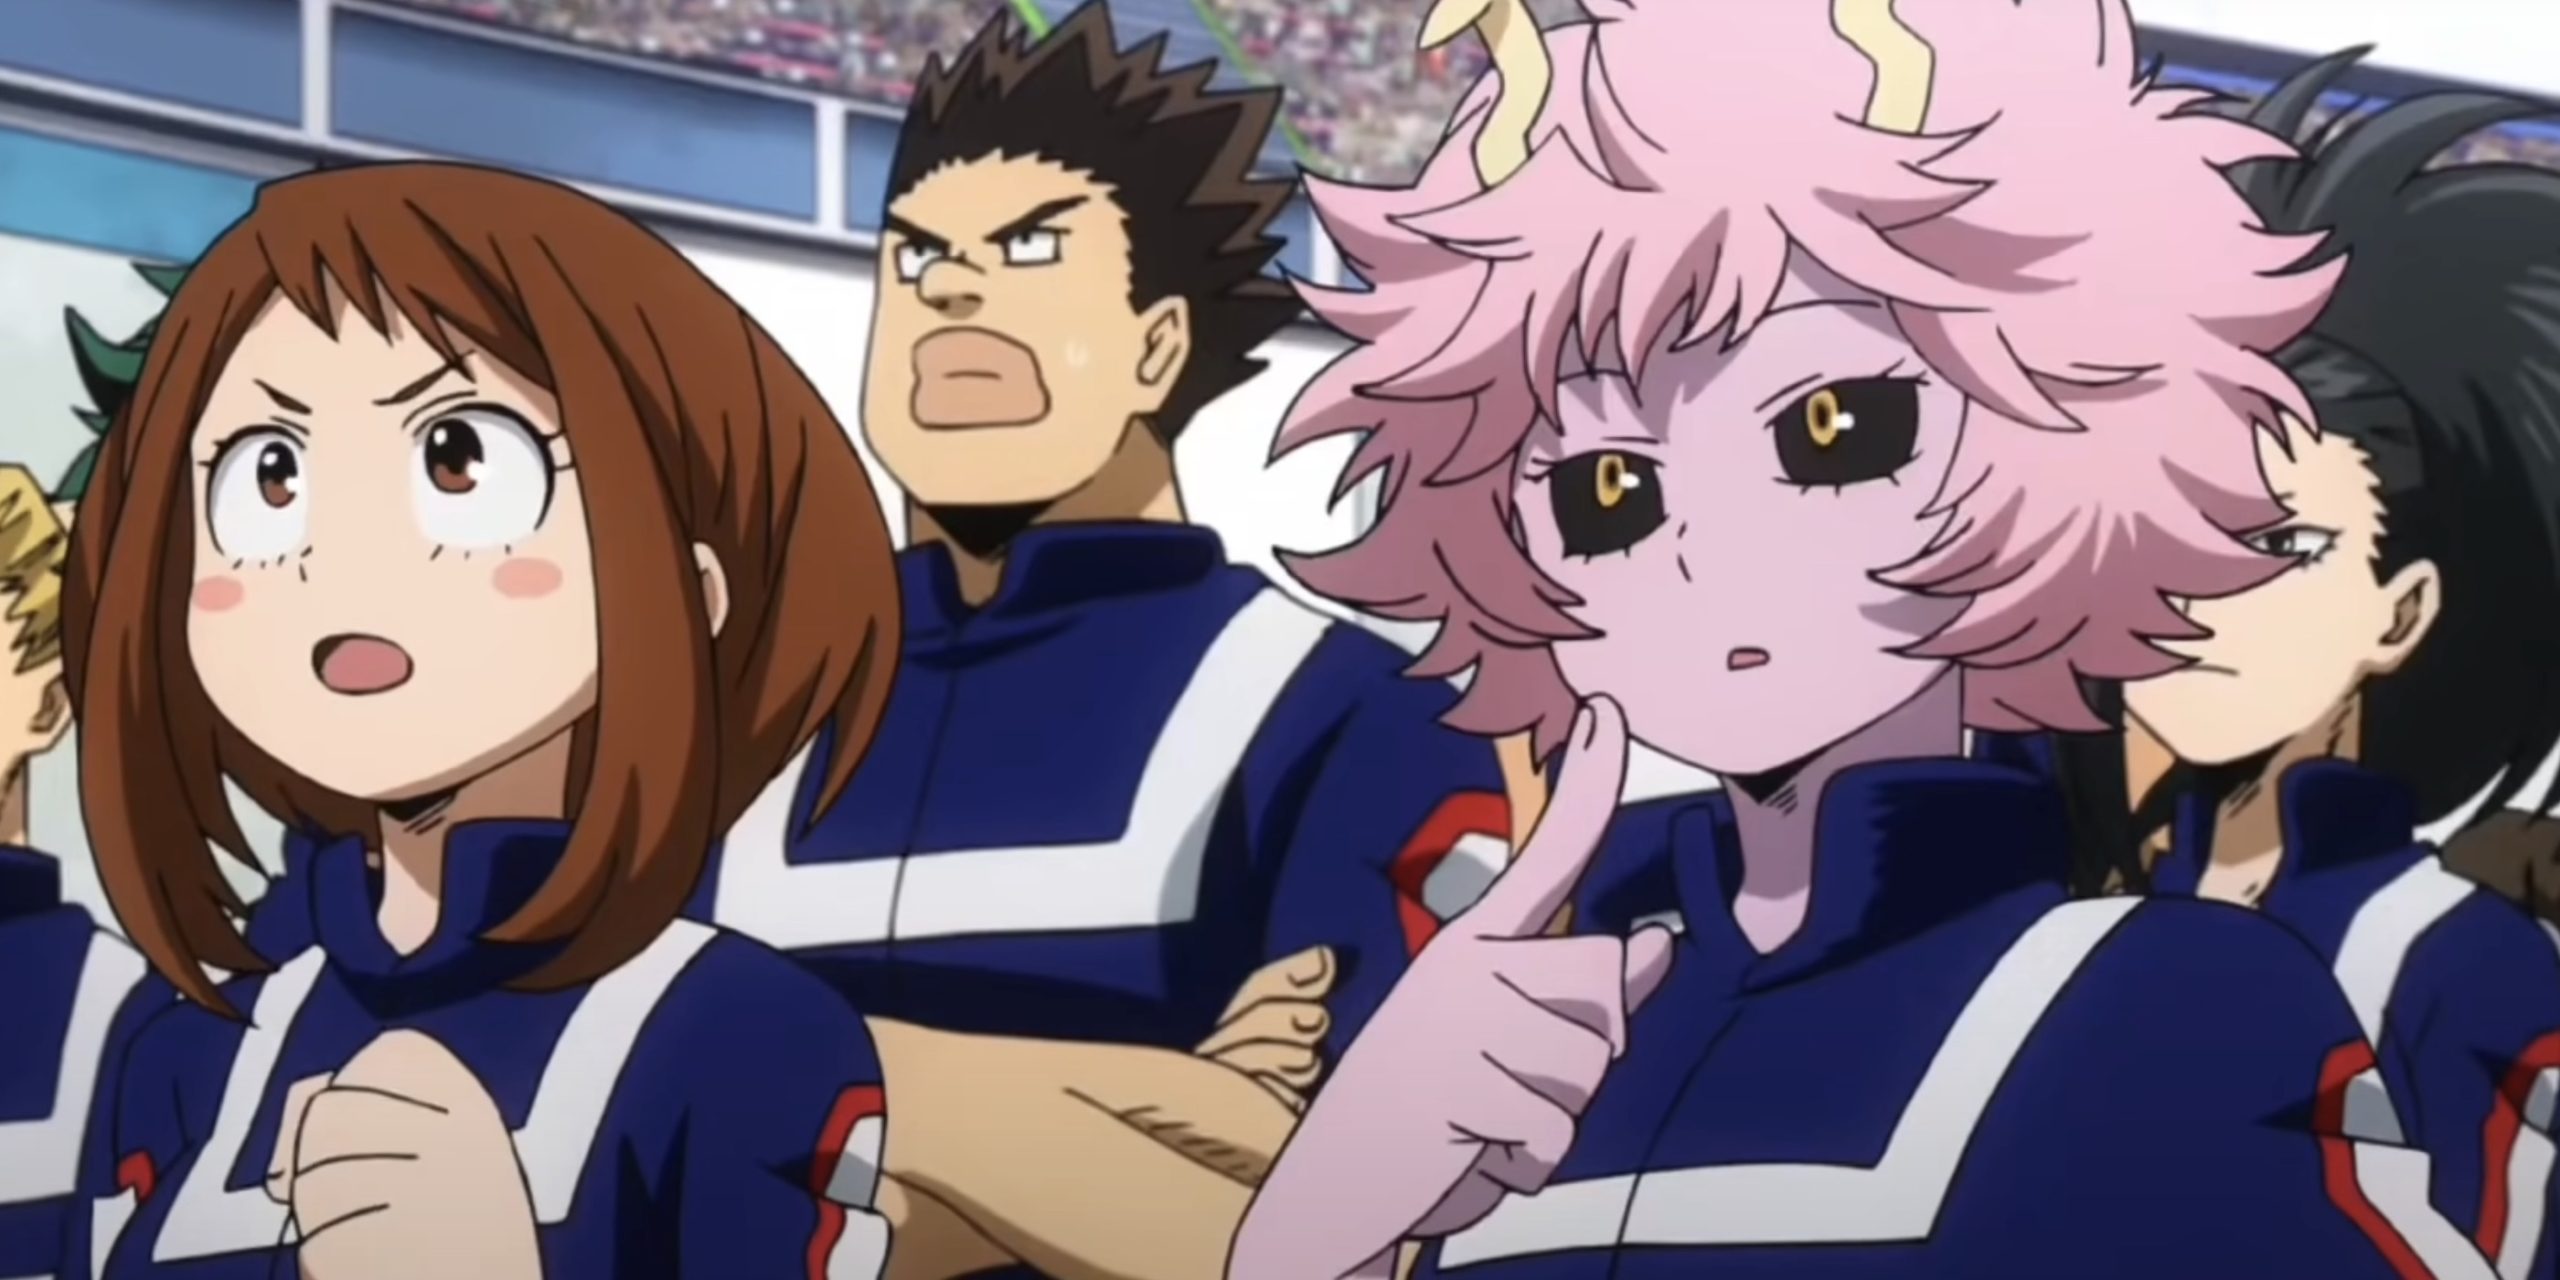 1705596723 642 The Real Reason Why Mina Ashidos Skin Is Pink In